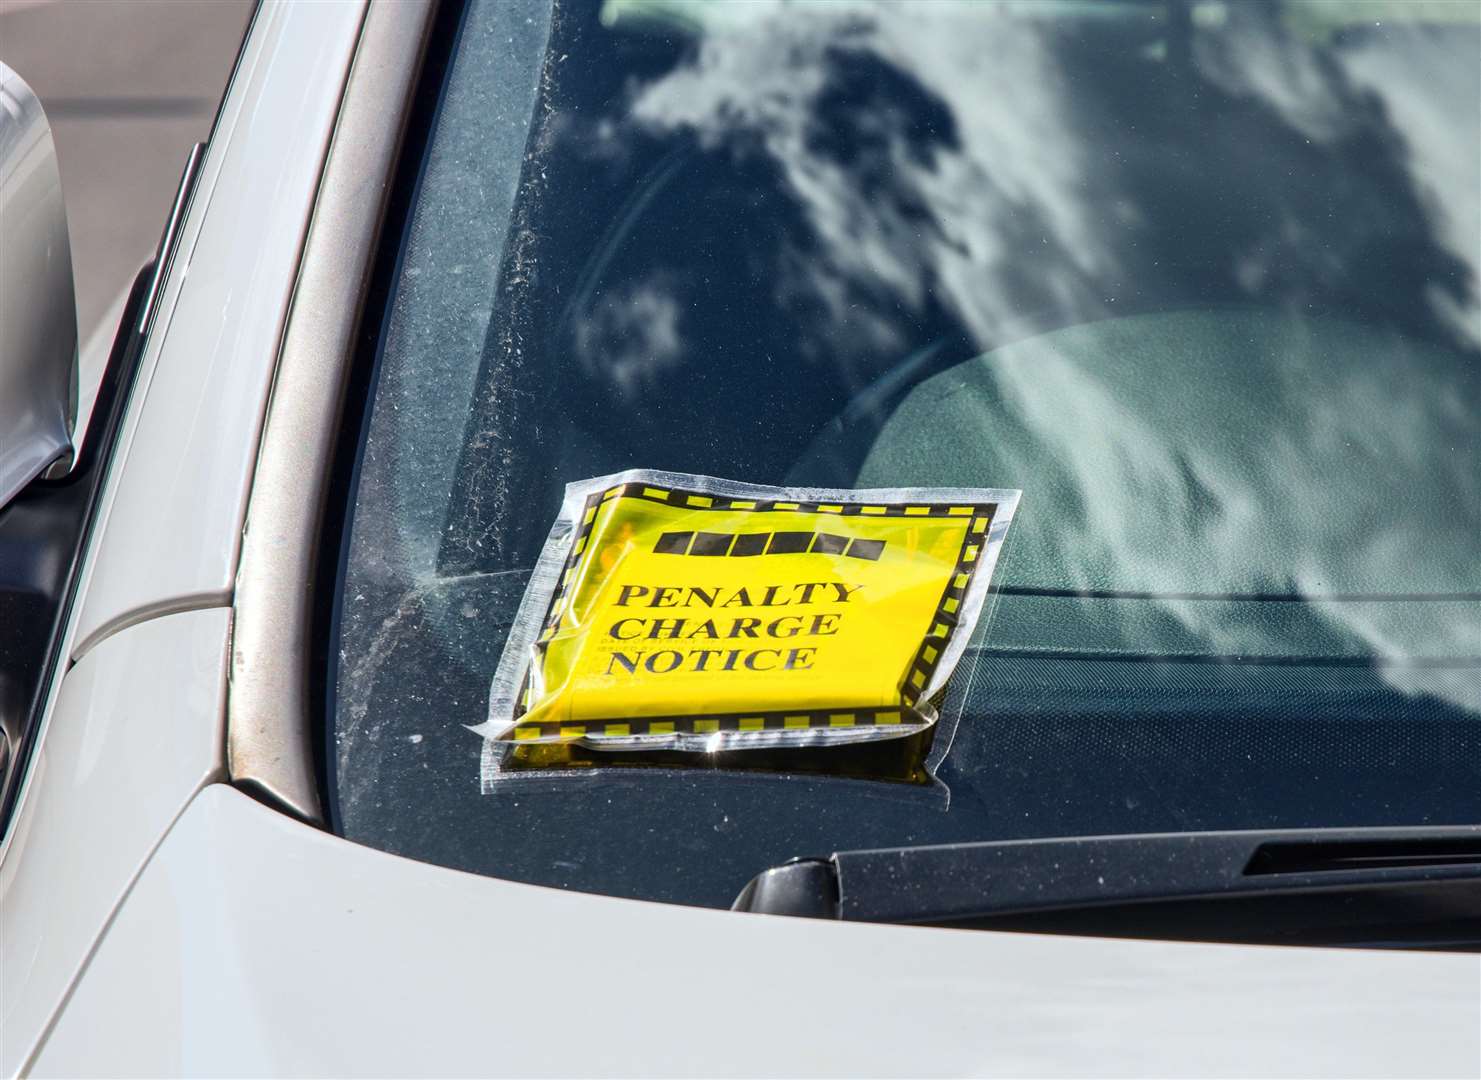 Although parking charges have been scrapped the authority is still urging residents to park responsibly to avoid fines.